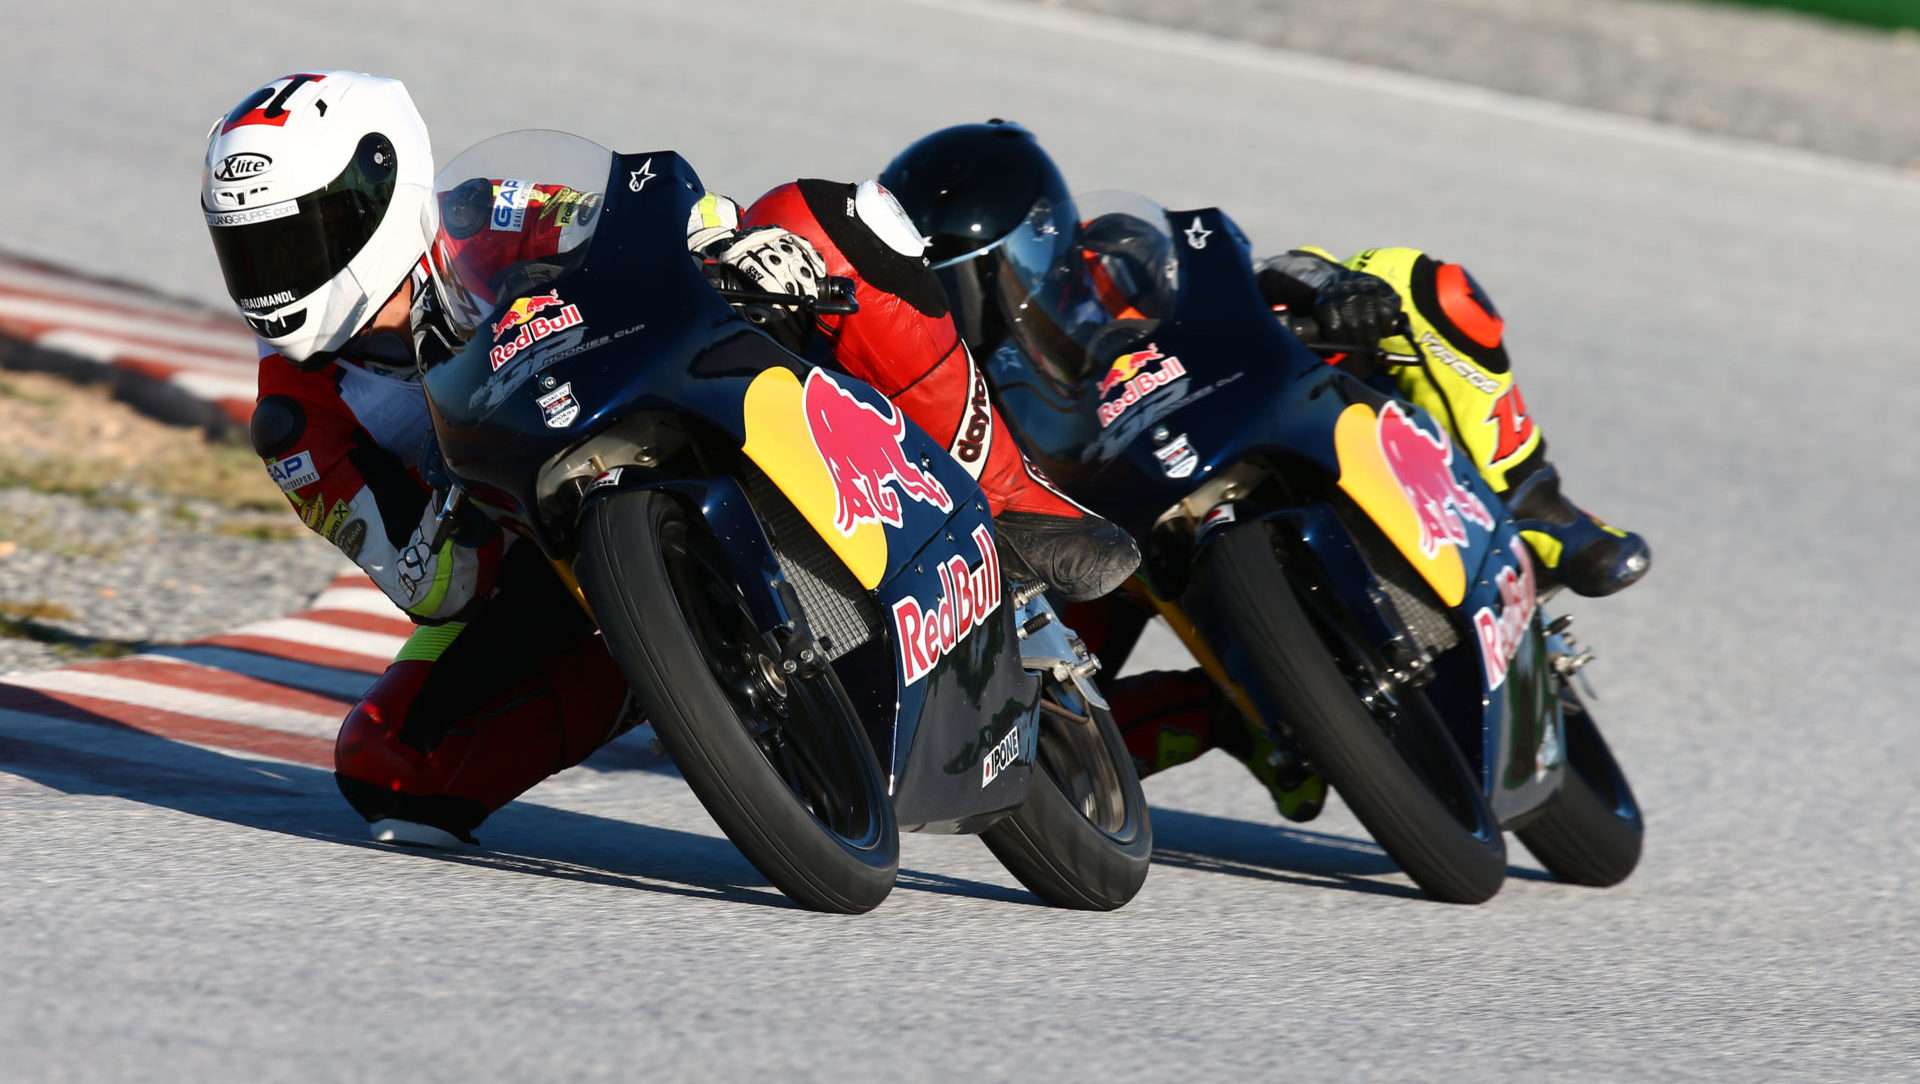 Action from the 2018 Red Bull MotoGP Rookies Cup selection event. Photo courtesy of Red Bull.